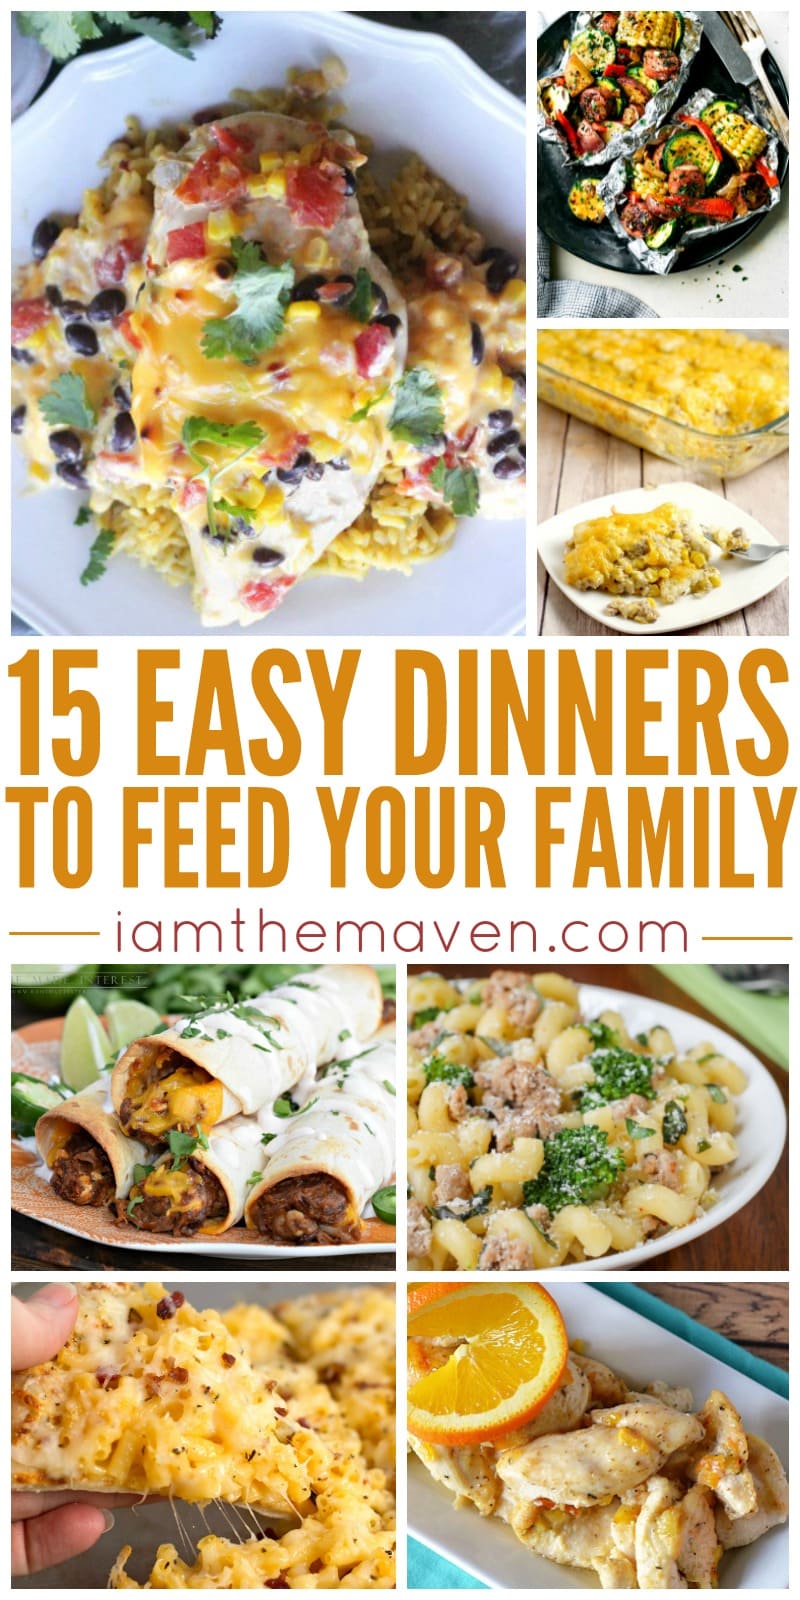 Quick And Easy Family Dinner Ideas - Best Design Idea